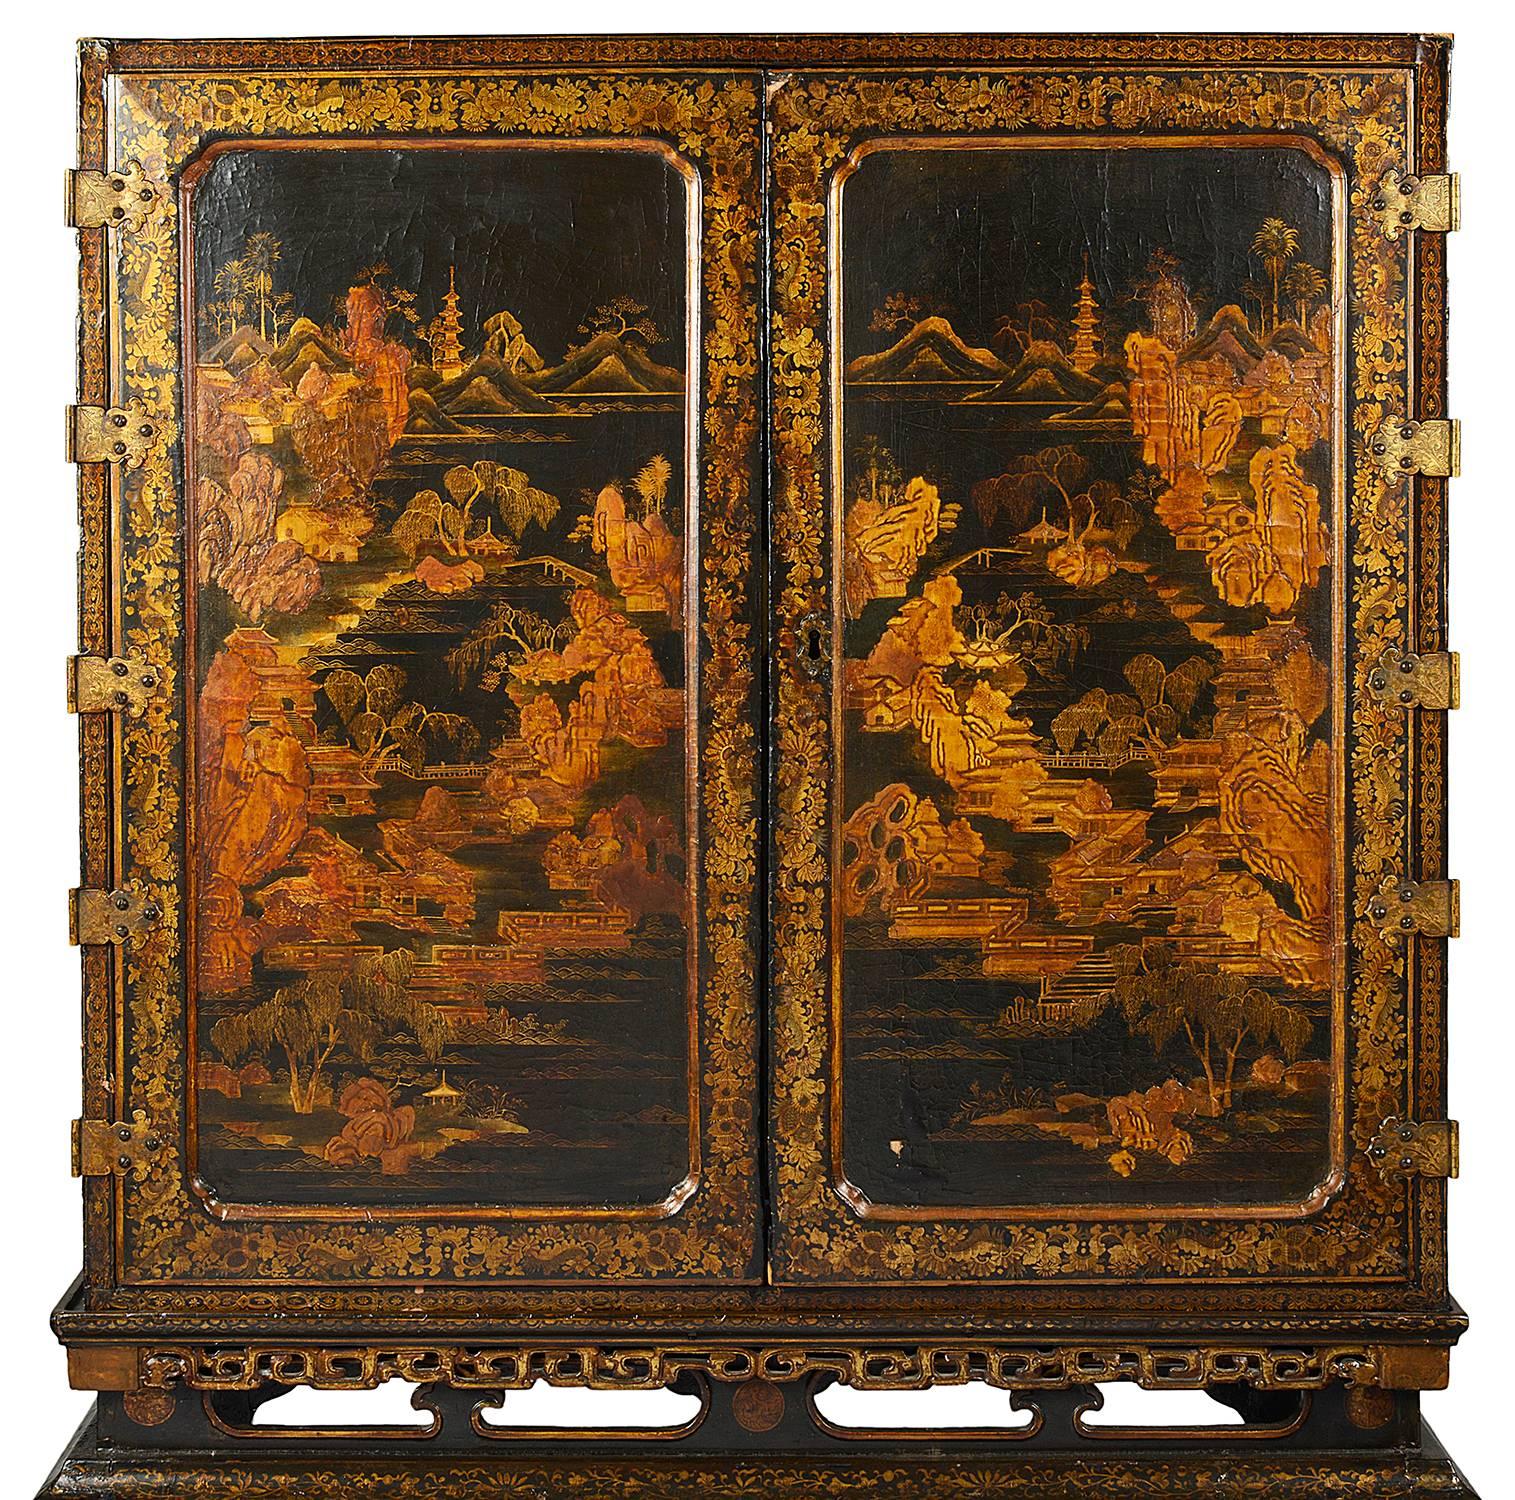 A wonderful quality 18th century Chinese export lacquer cabinet on stand. Having classical black lacquer and gilded Chinoiserie decoration. The pair of doors opening to reveal this spectacular fitted interior, with drawers, cupboards and